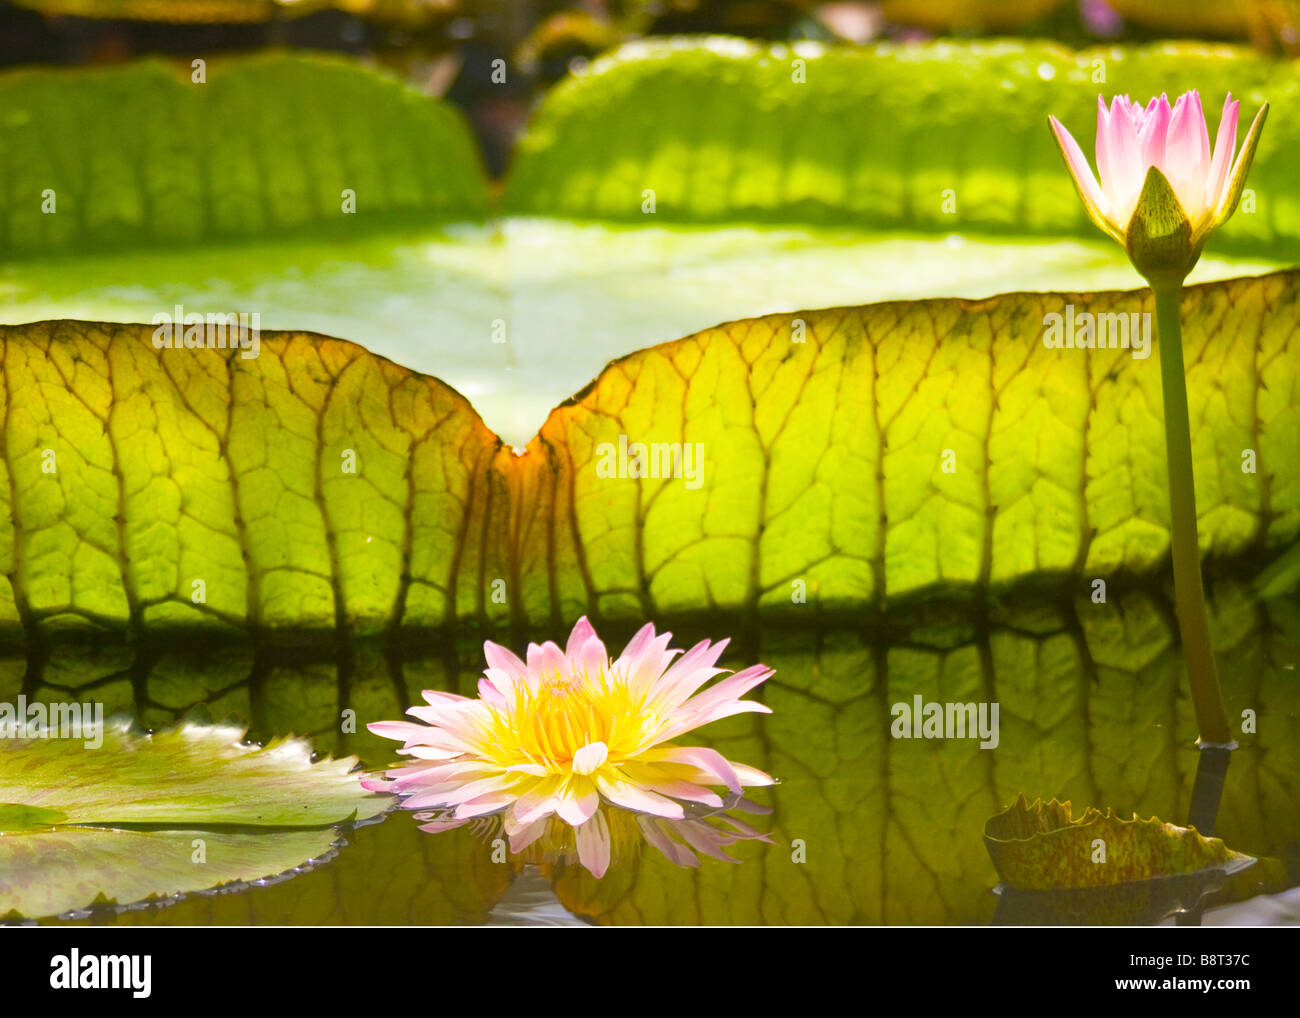 Landscape view of a Giant Waterlily in bloom with pink flowers and pads. Stock Photo